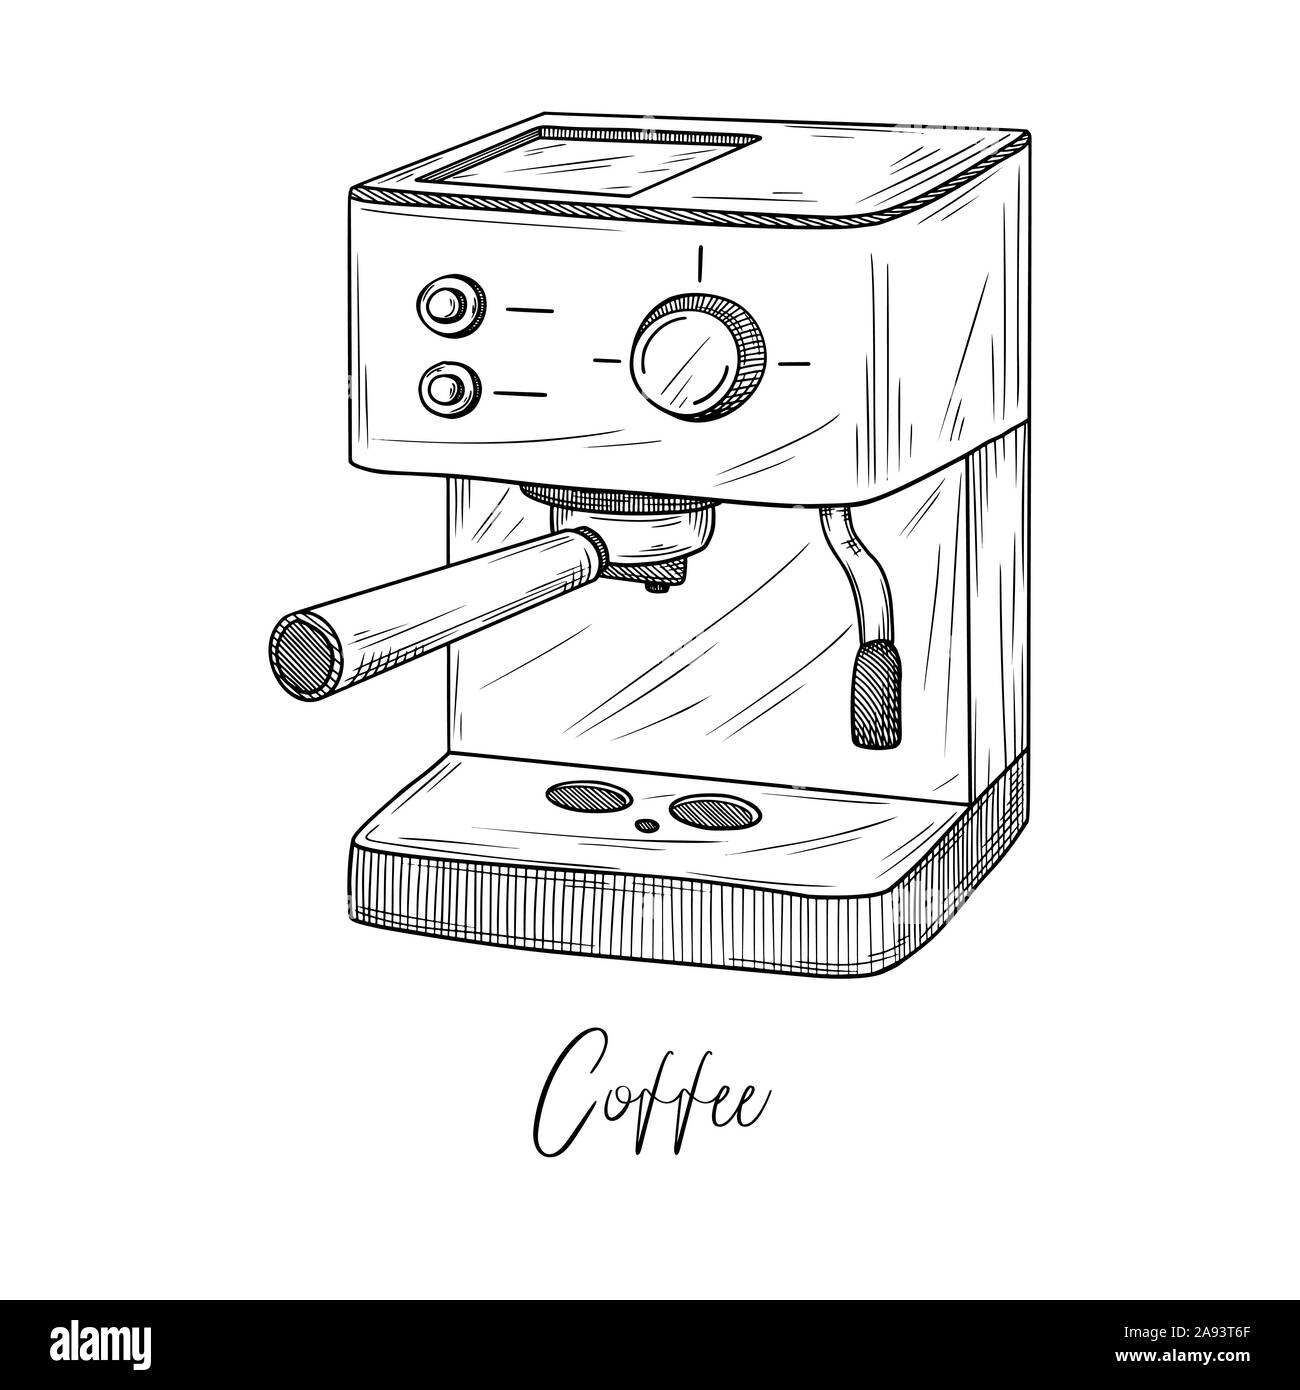 Sketch of coffee maker isolated on white background. Vector illustration in sketch style. Stock Vector